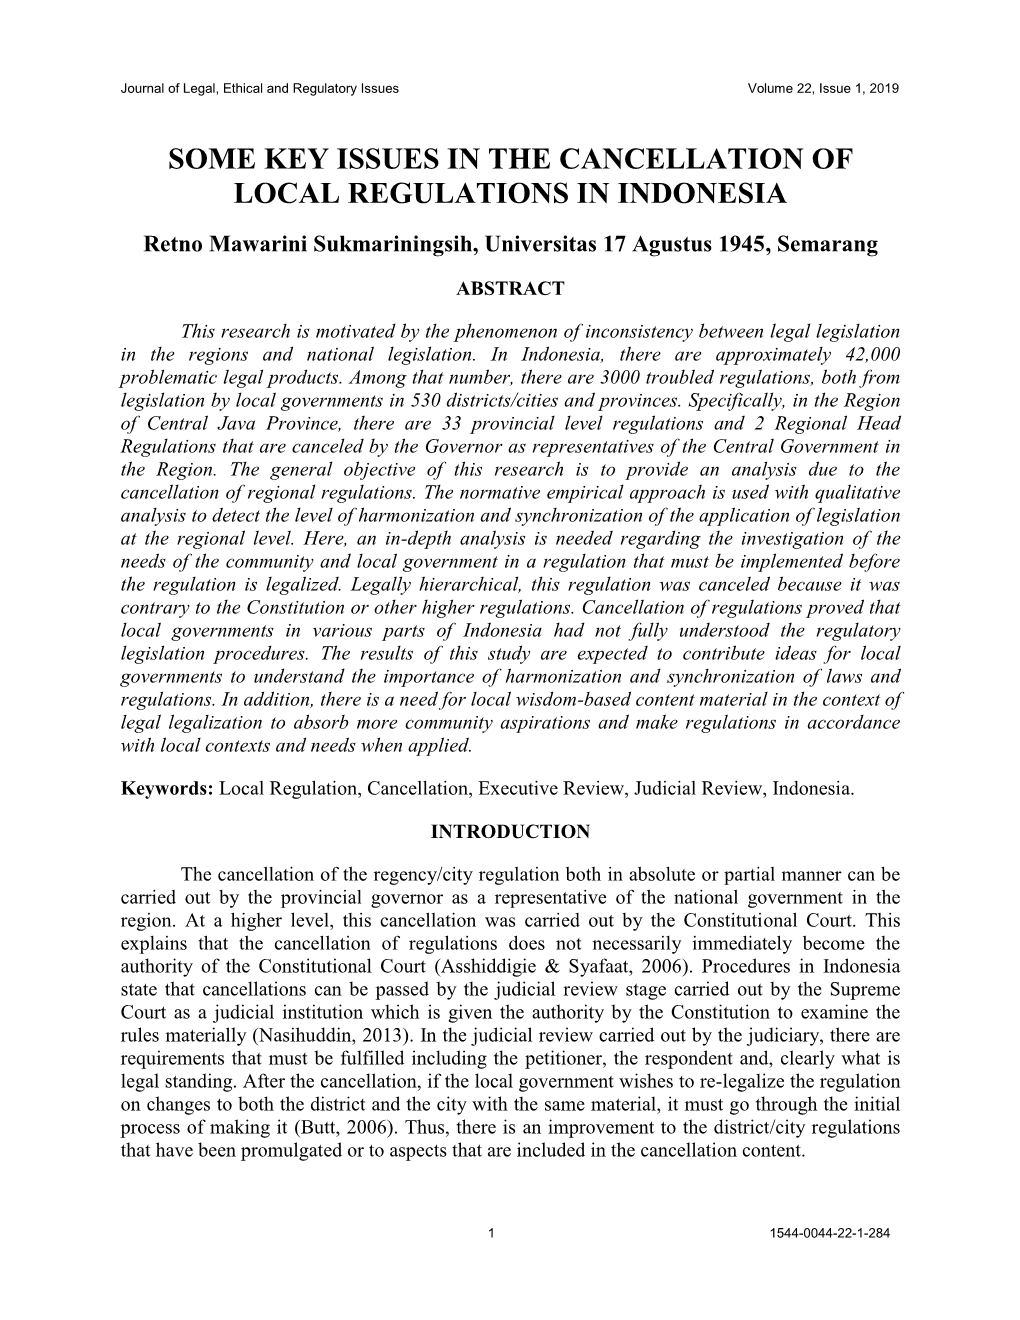 Some Key Issues in the Cancellation of Local Regulations in Indonesia